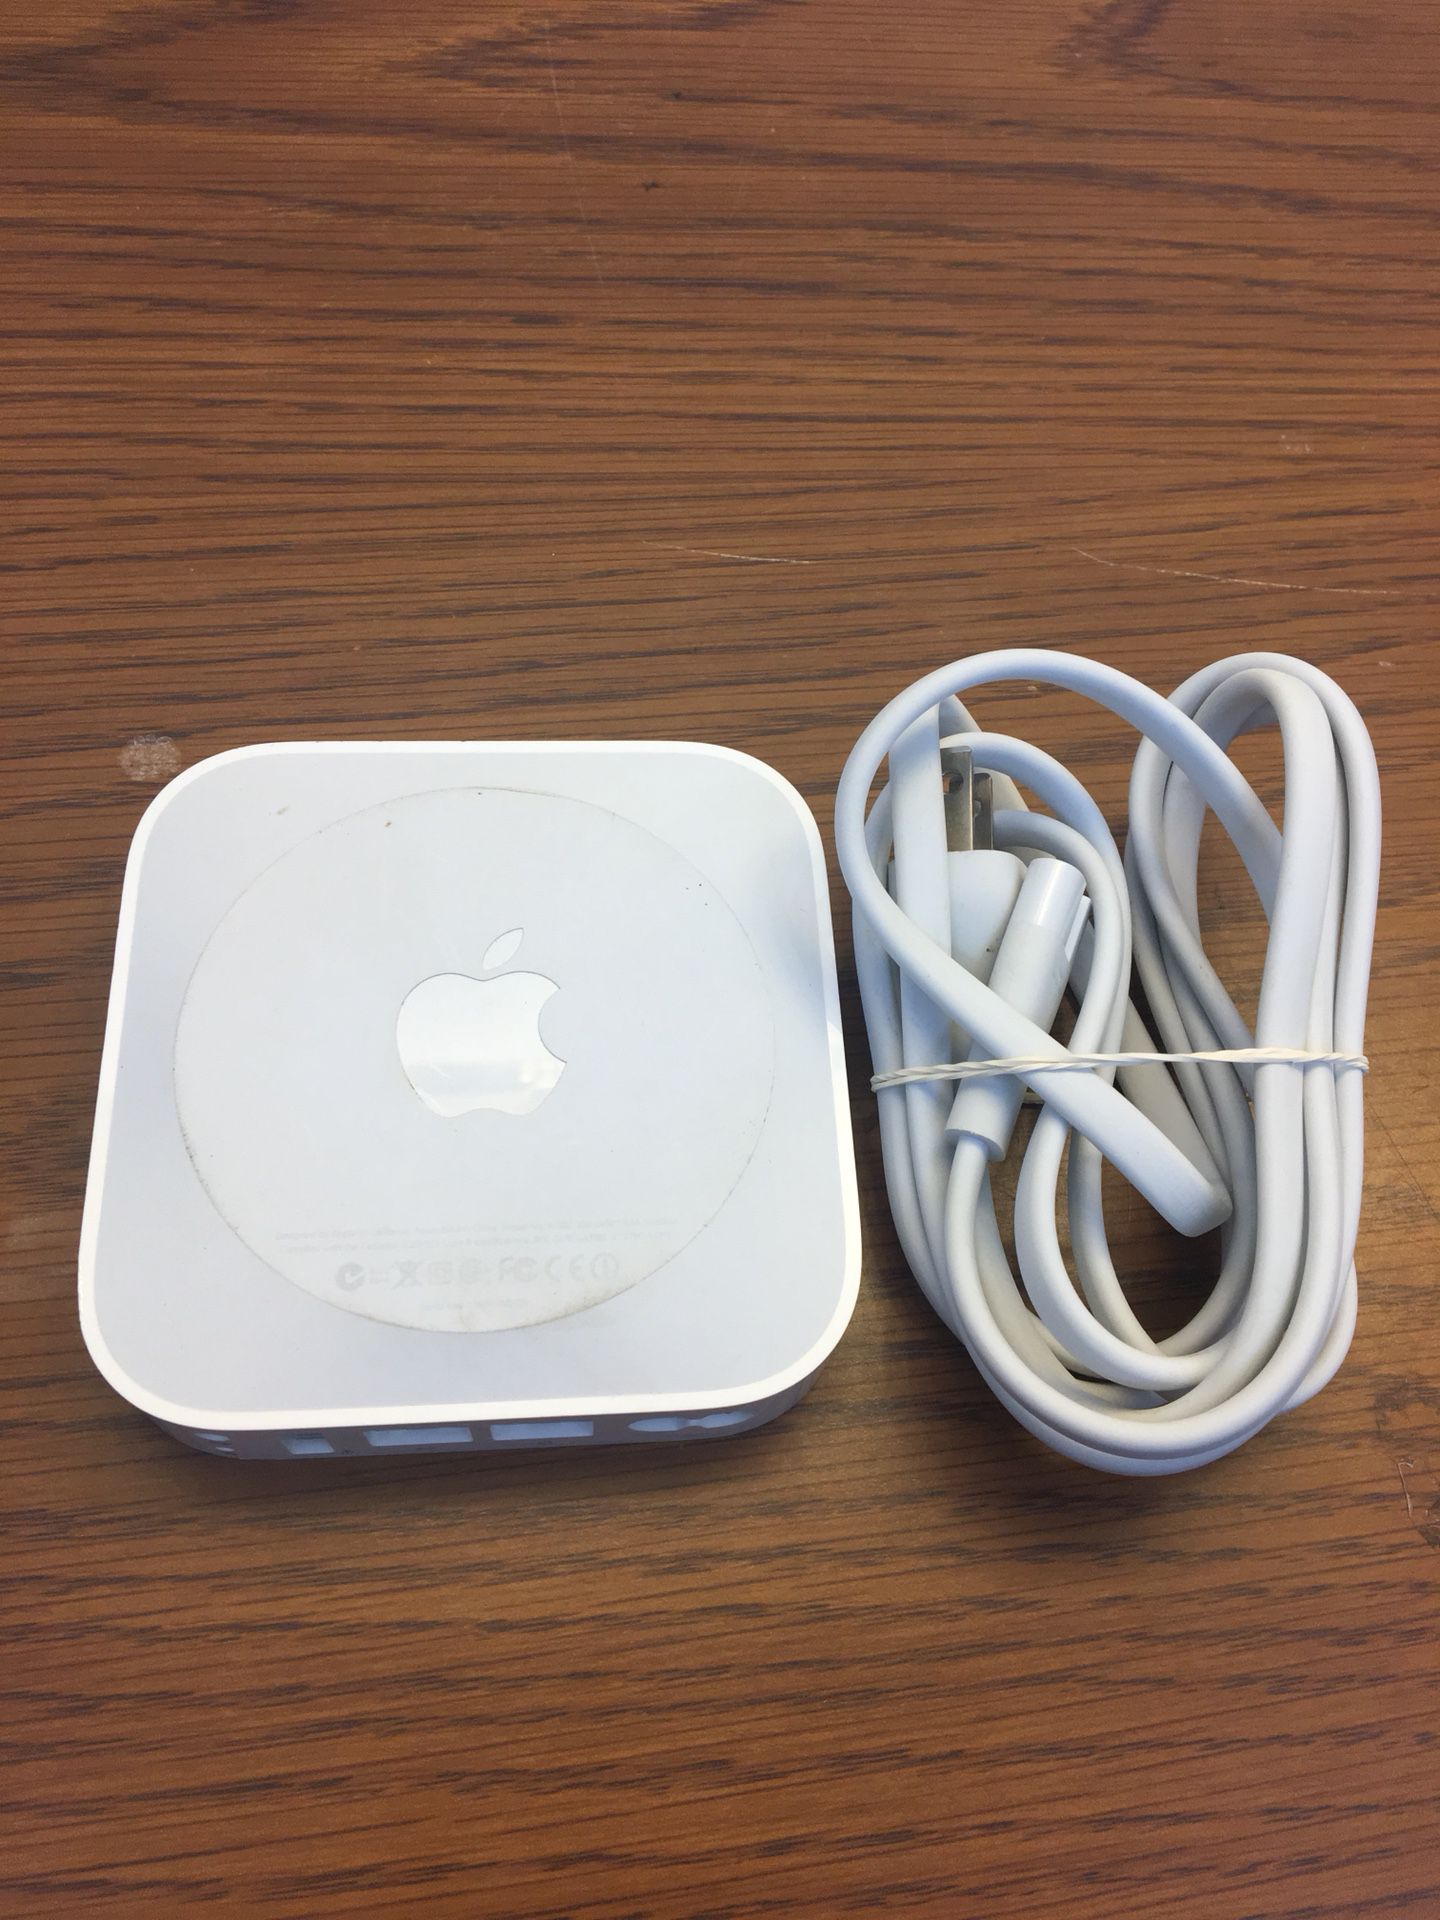 Apple Airport Express A1392 Wireless WiFi Router 2nd Generation